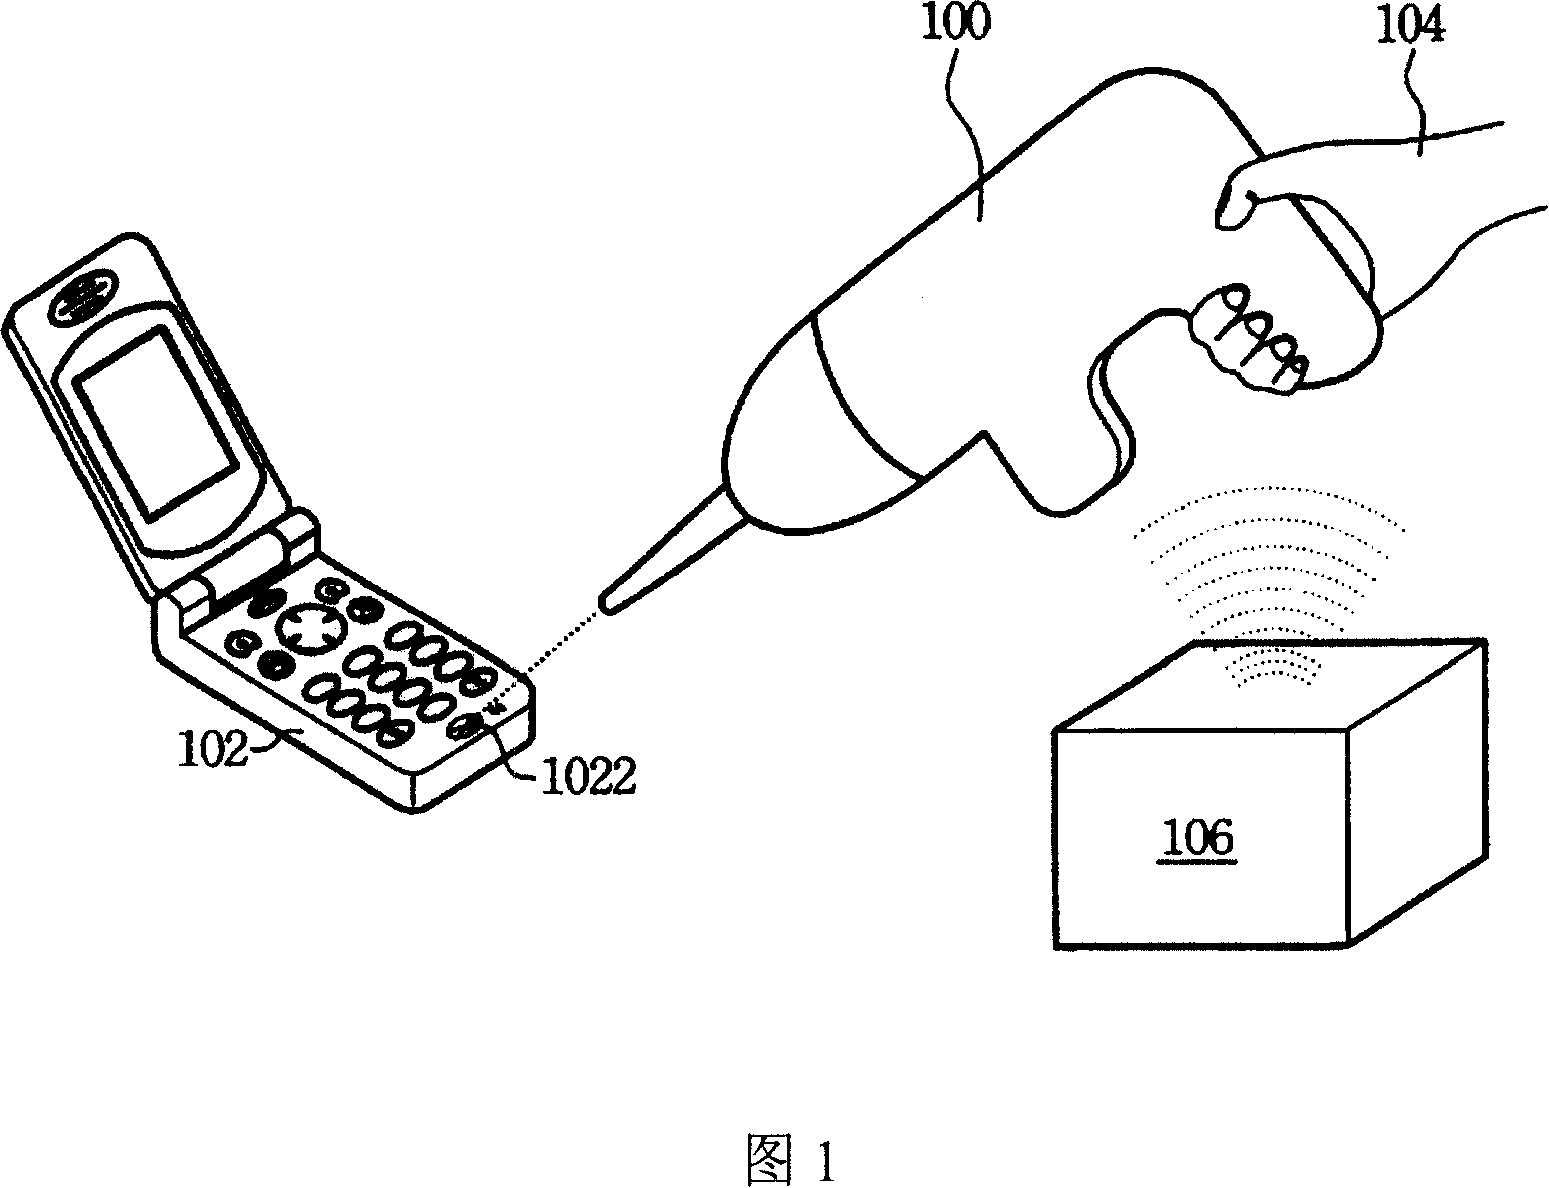 Electrostatic discharge test device and method